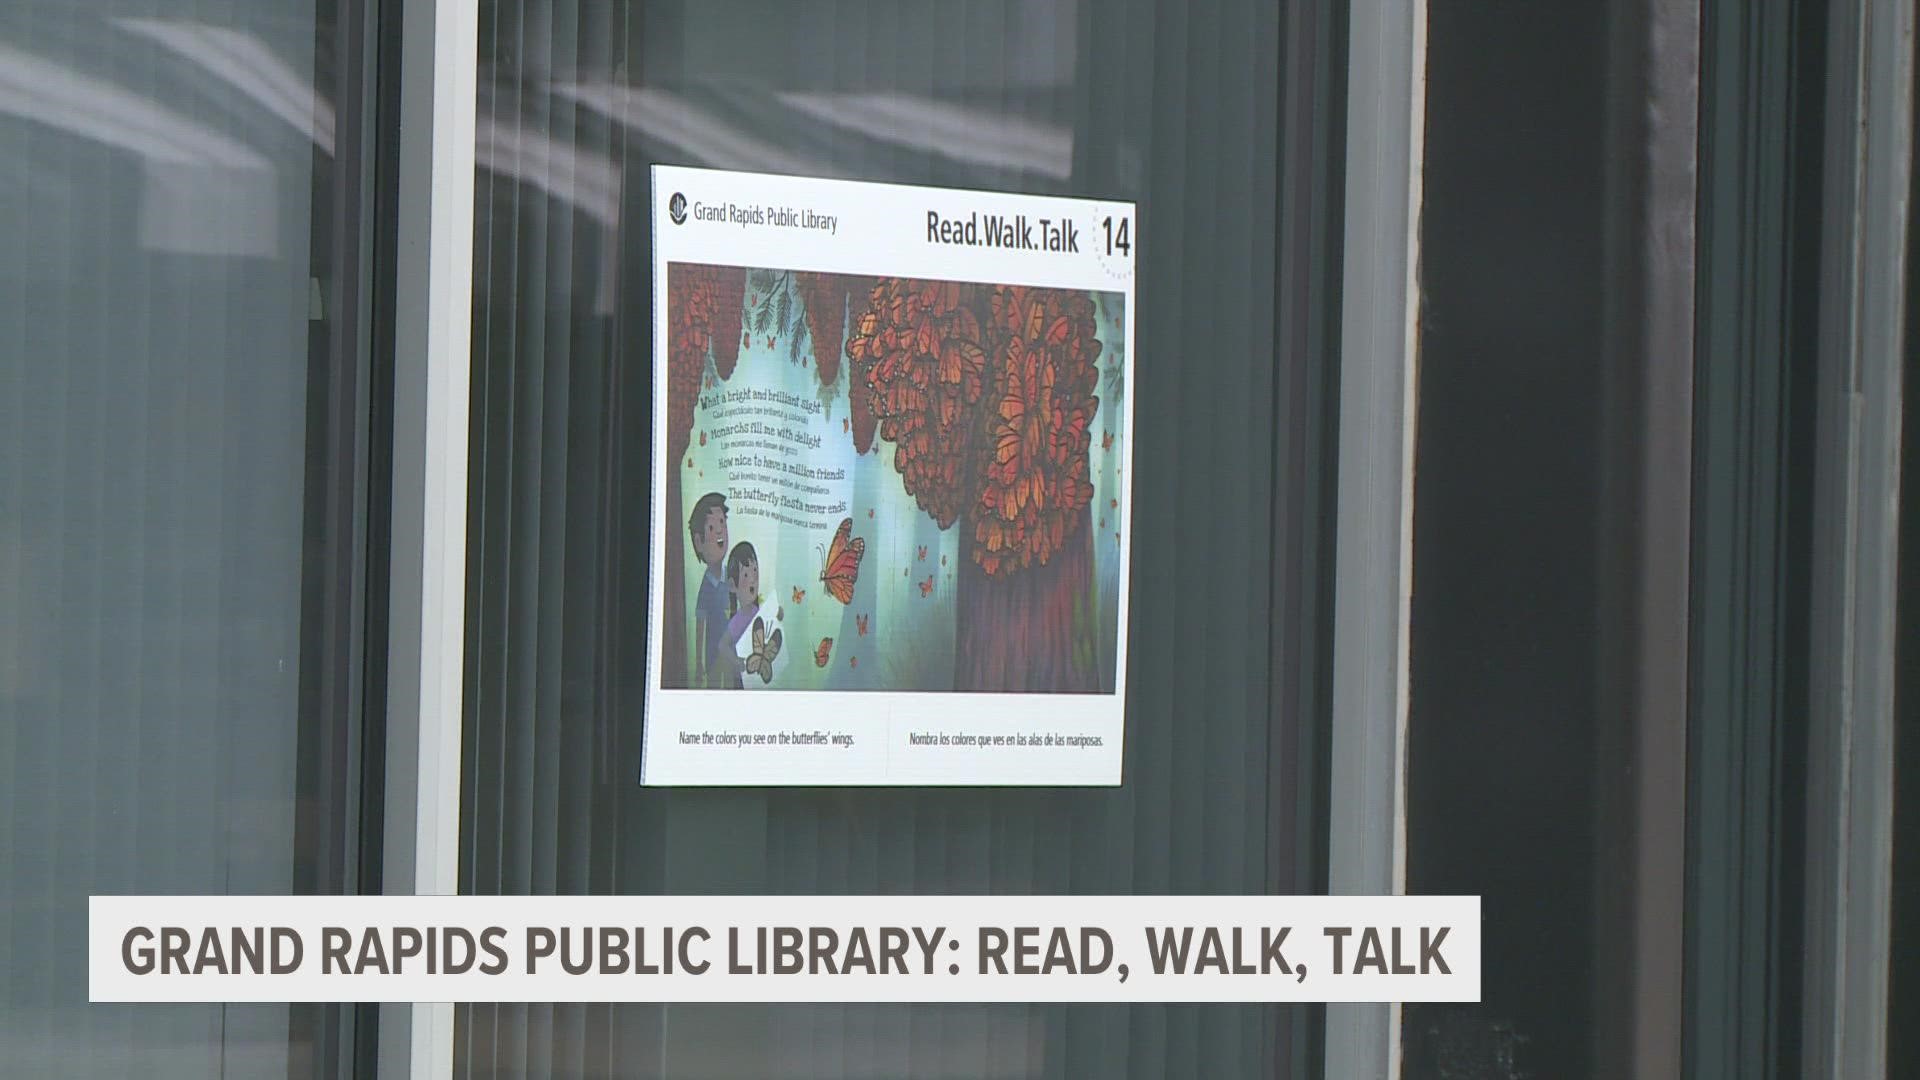 Read, Walk and Talk: The Grand Rapids Public Library offers a new fall program to get kids reading more.